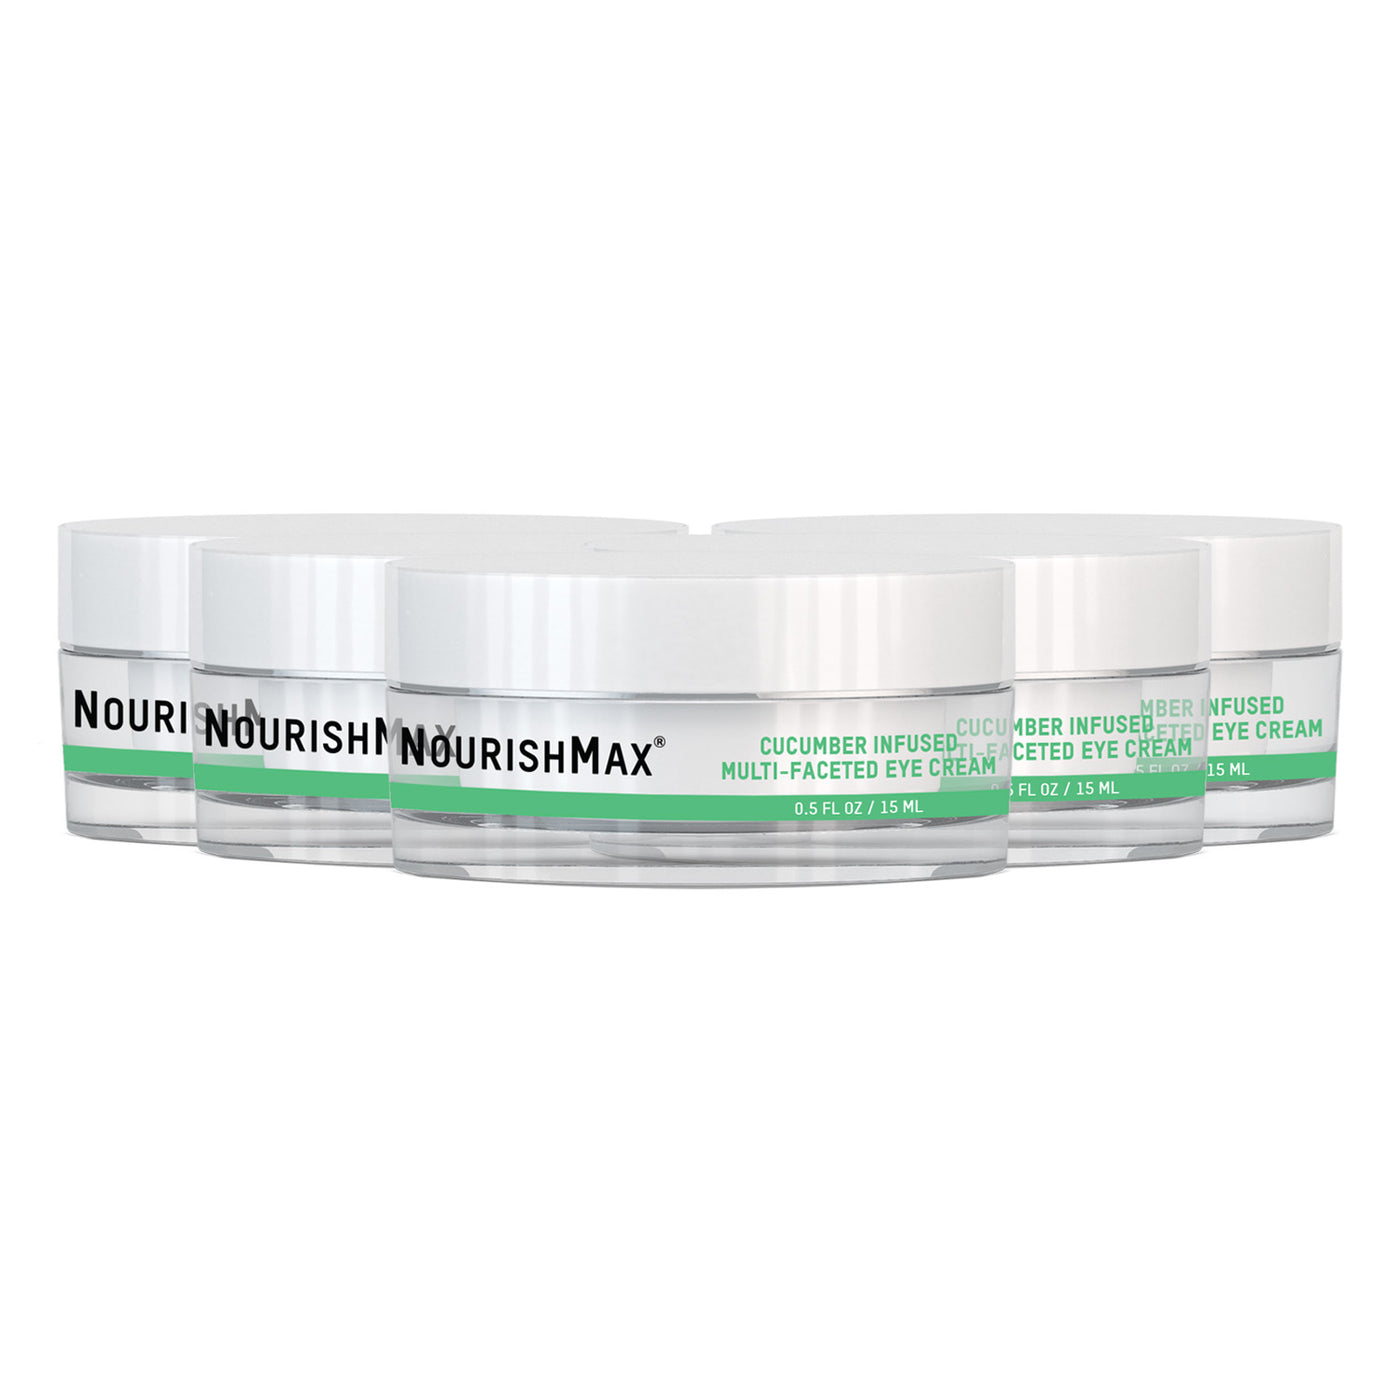 5 Cucumber Infused Multi-Faceted Eye Cream